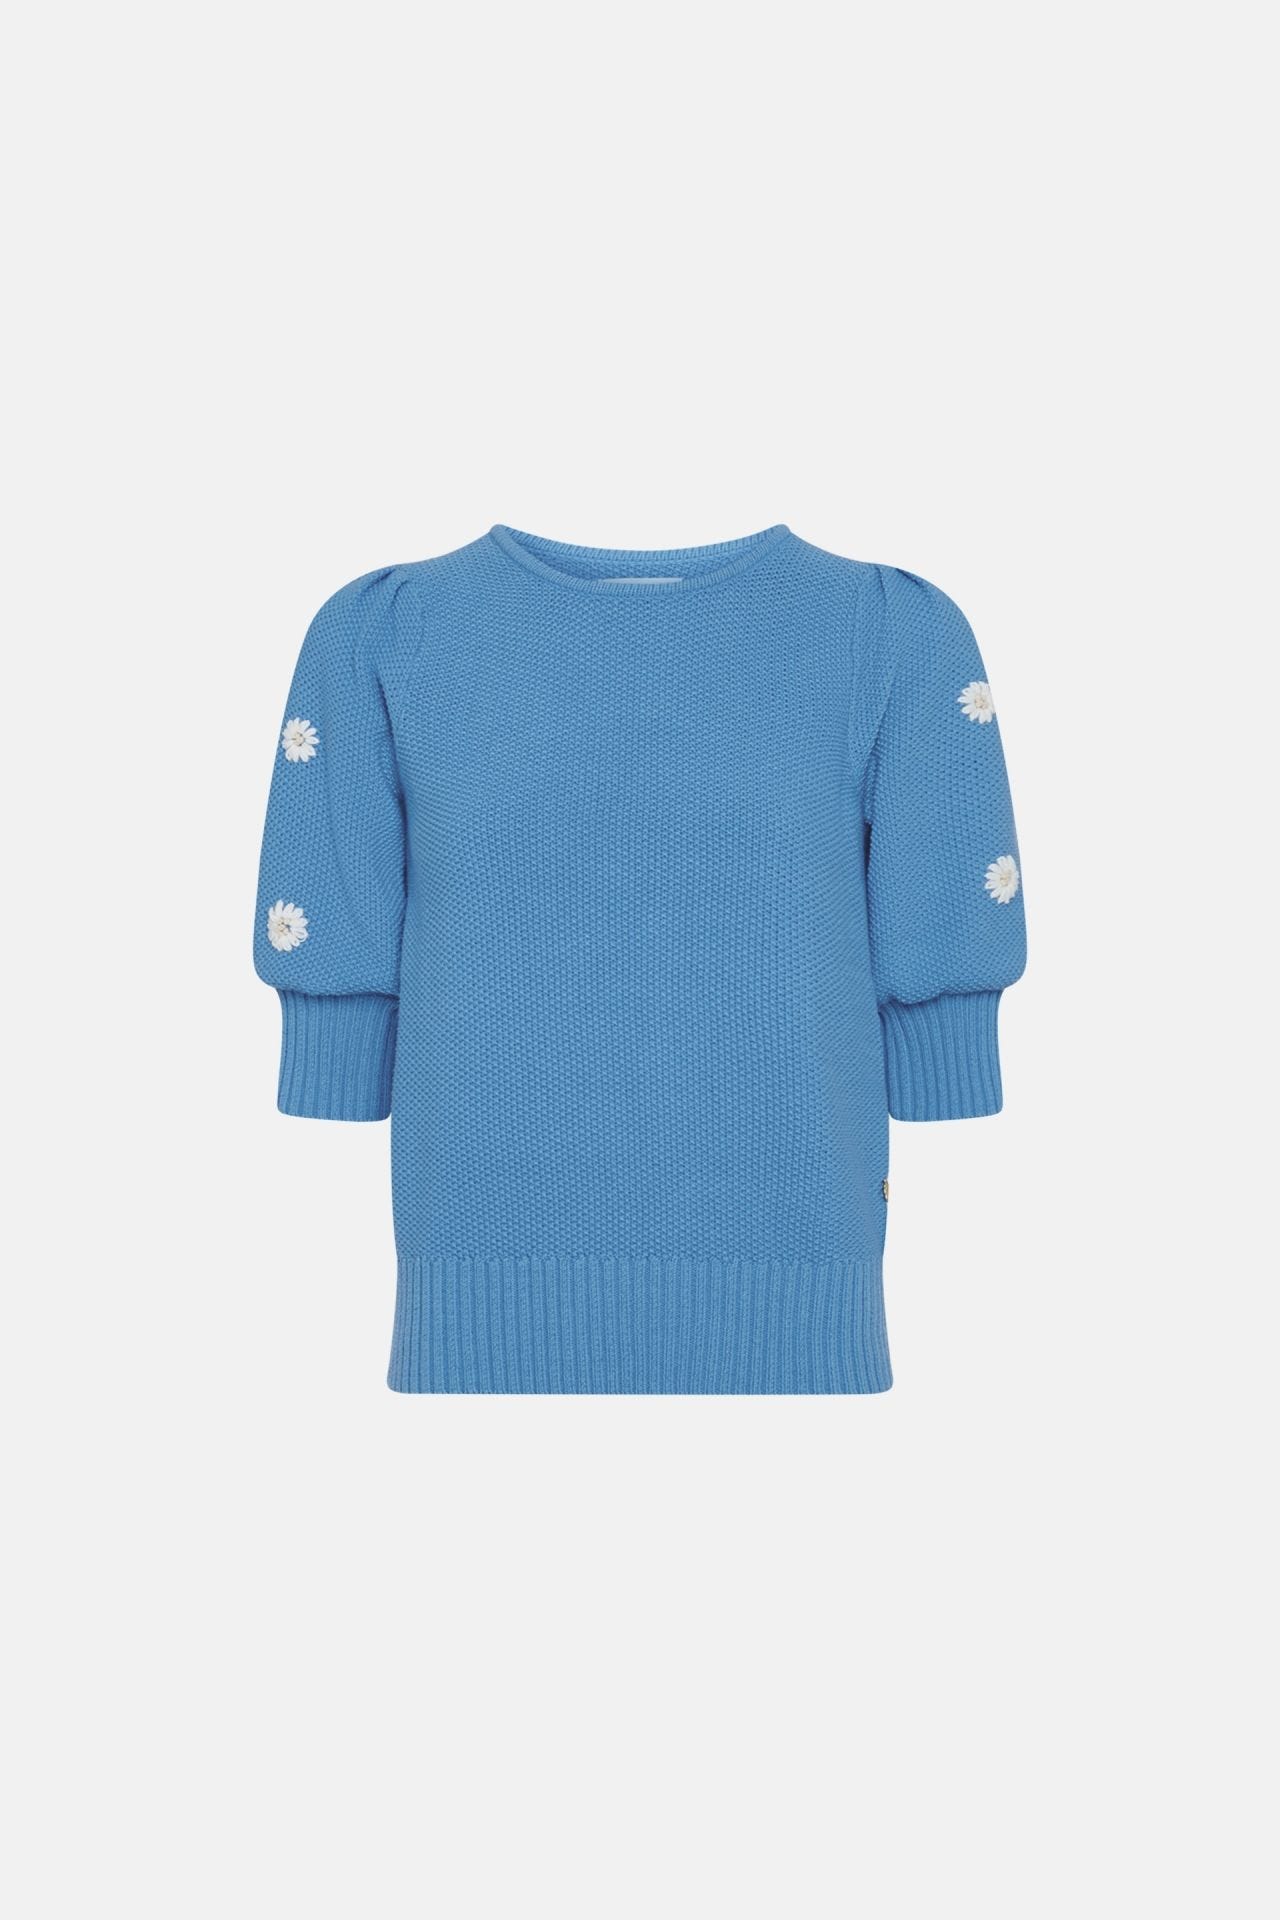 Blauwe dames pullover Fabienne Chapot - Rice pullover